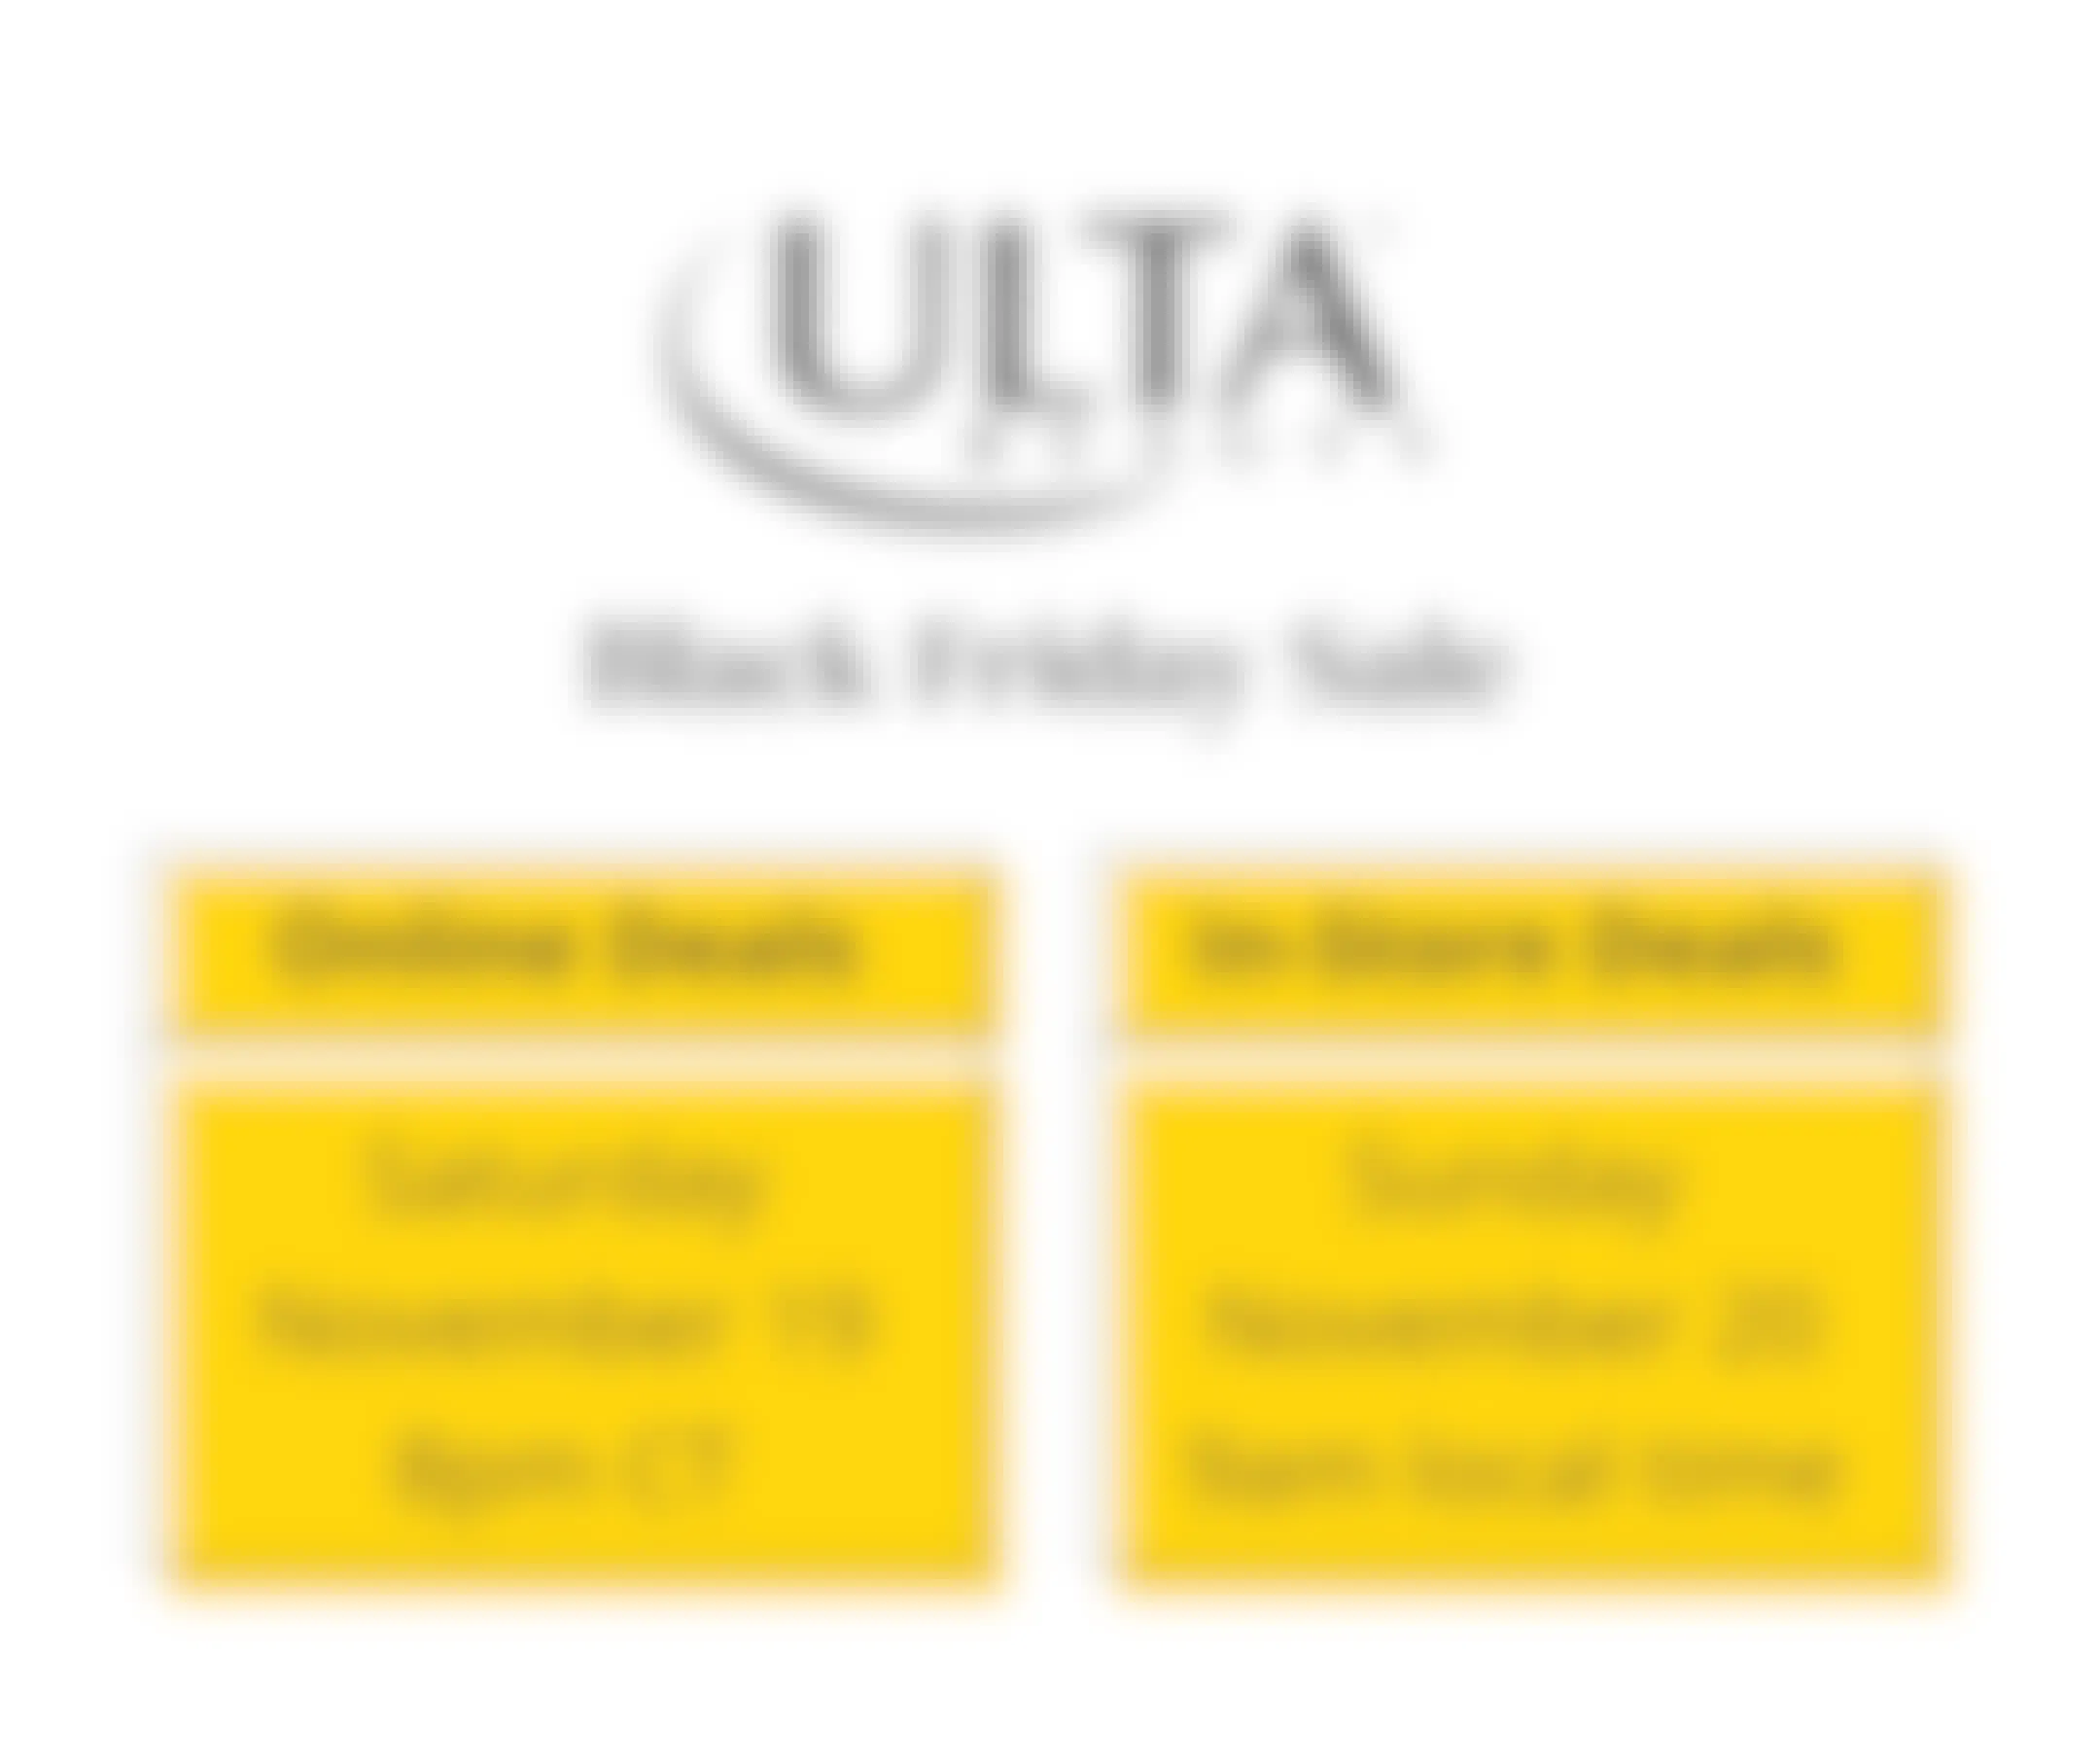 The start and end dates for the Ulta Black Friday sale